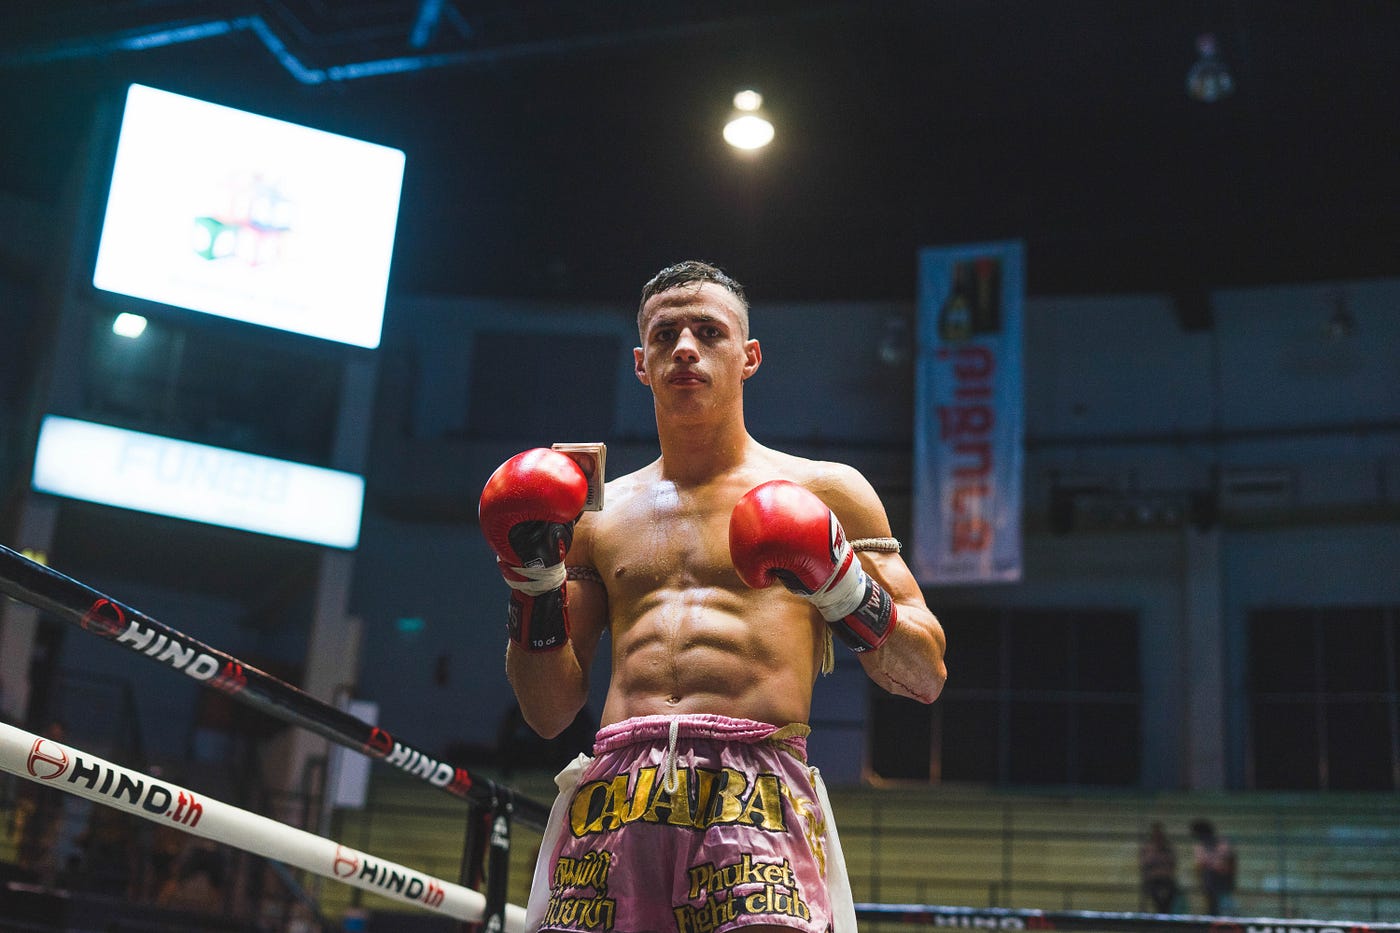 Seven Ways Muay Thai Can Radically Improve Your Life by Kevin Ervin Kelley, AIA Mind Cafe Medium